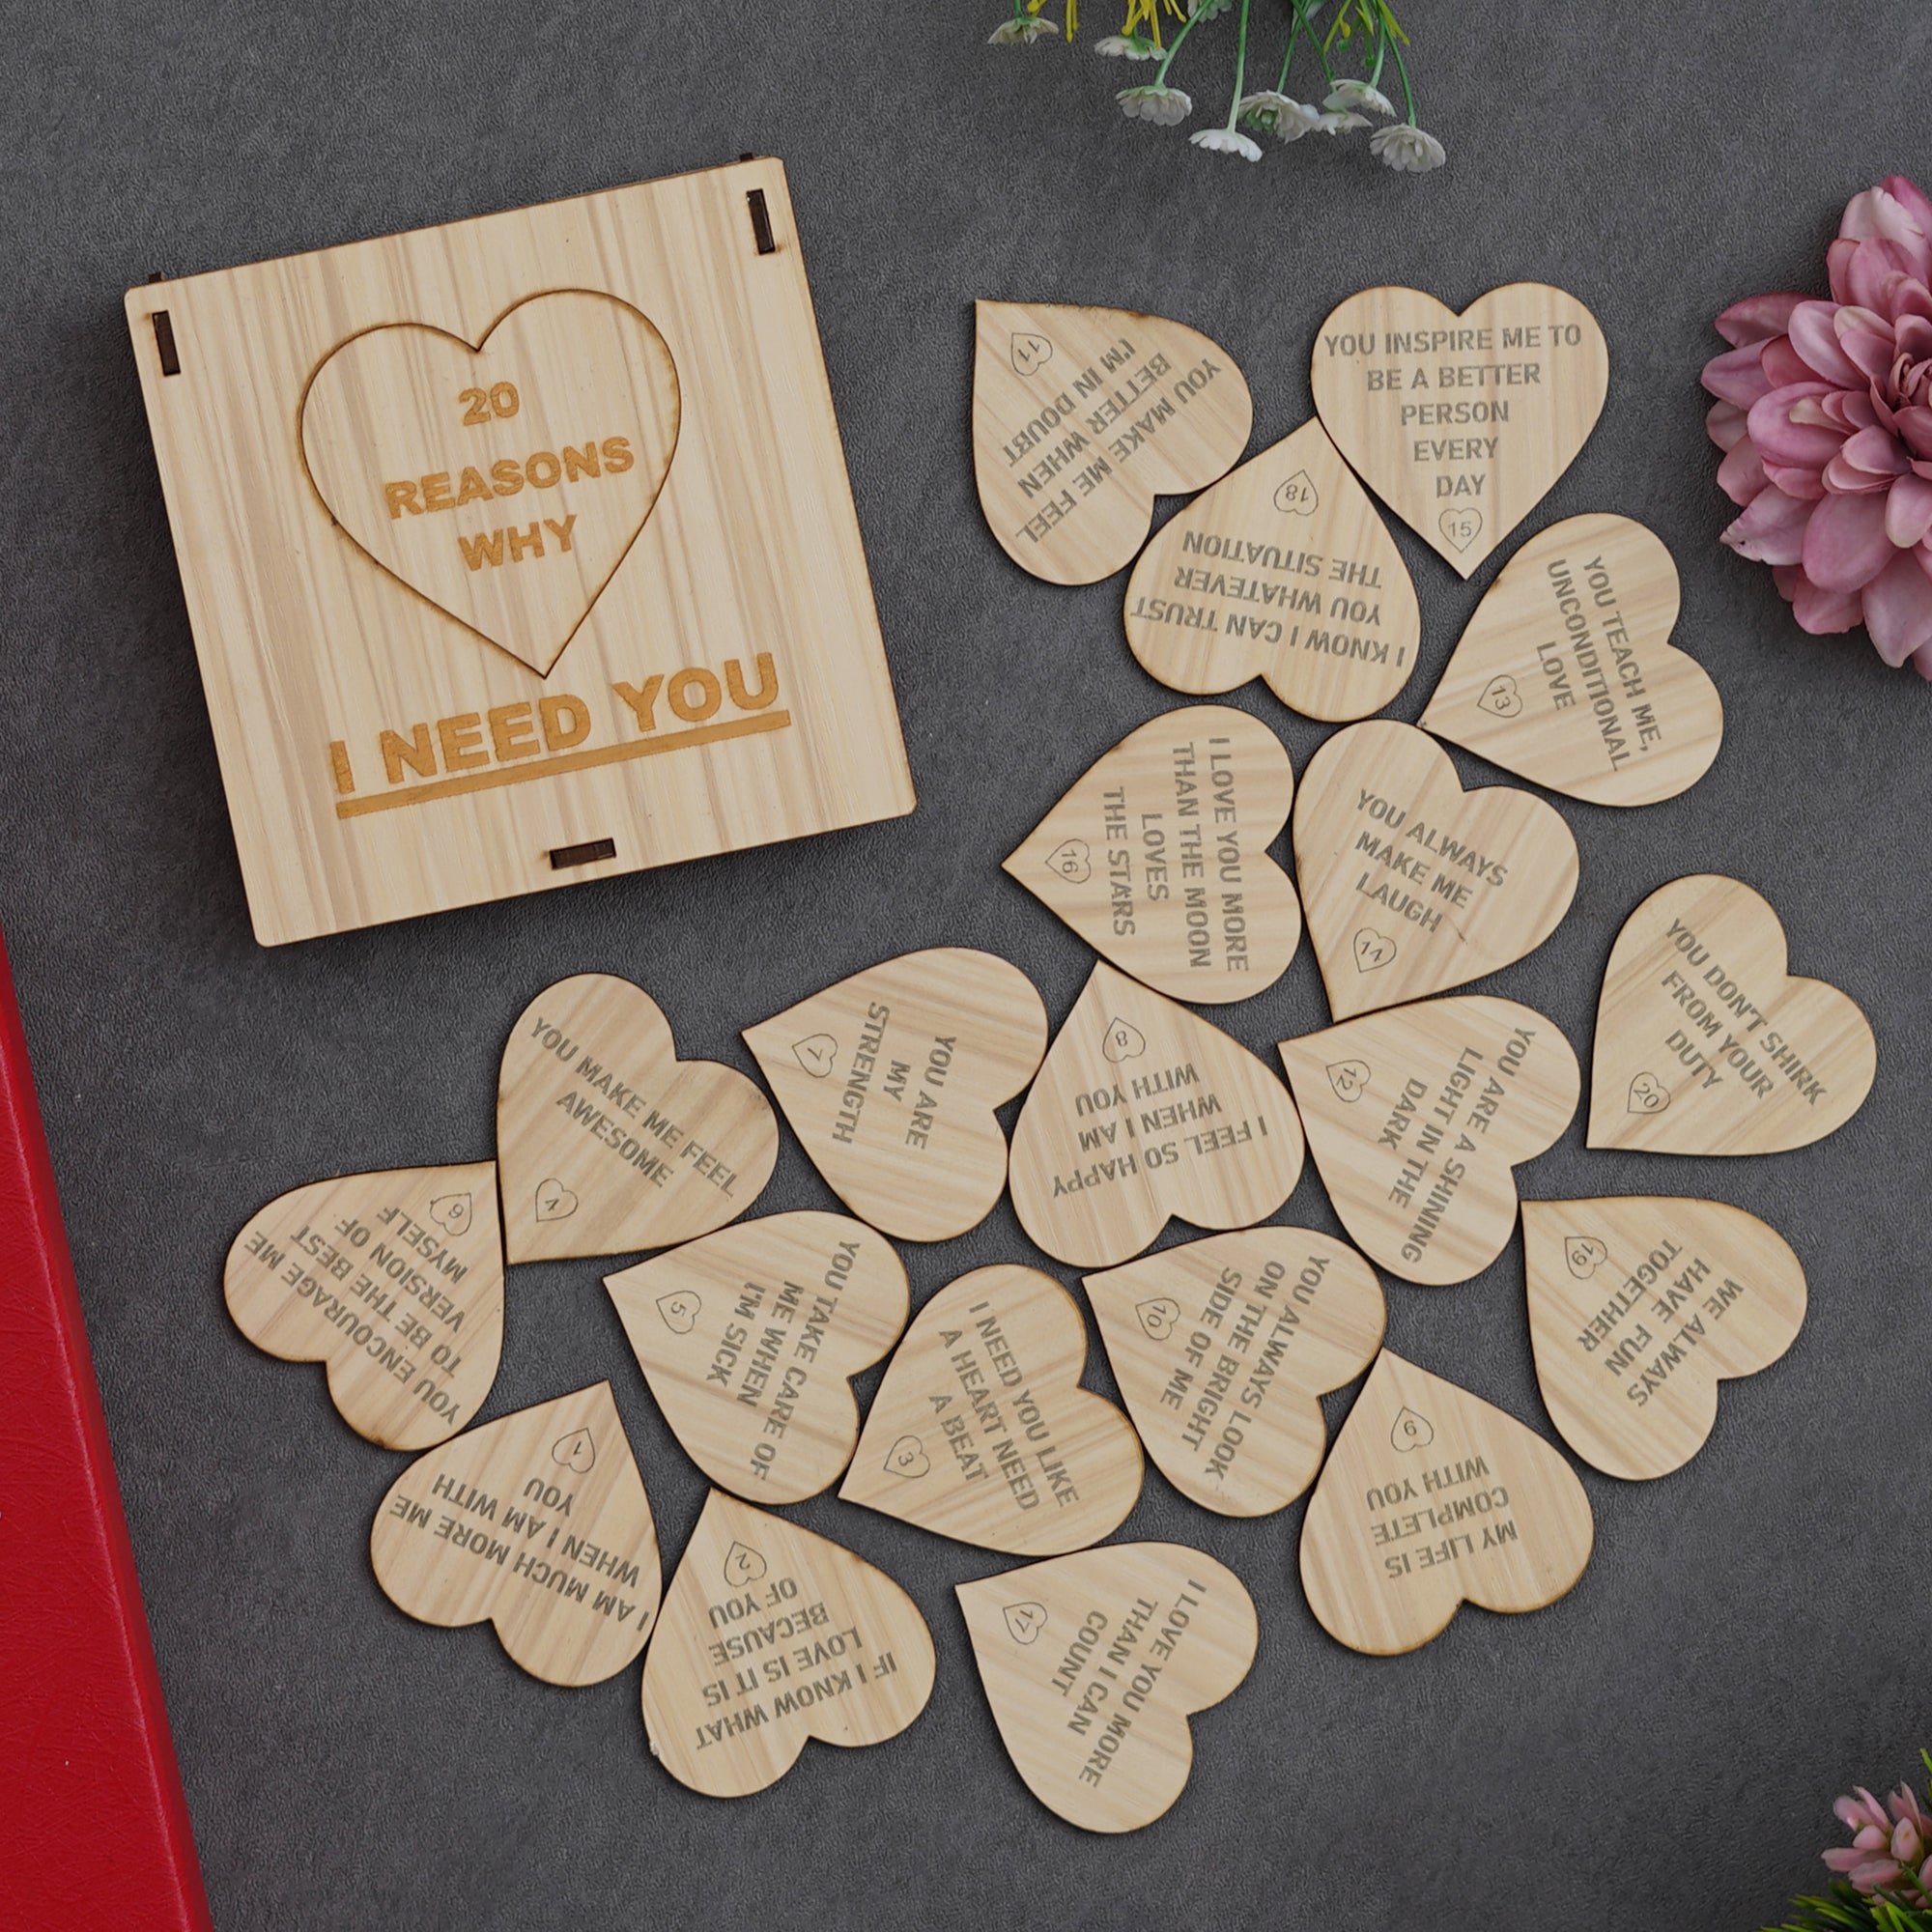 Valentine Combo of Golden Rose Gift Set, "20 Reasons Why I Need You" Printed on Little Hearts Wooden Gift Set 3